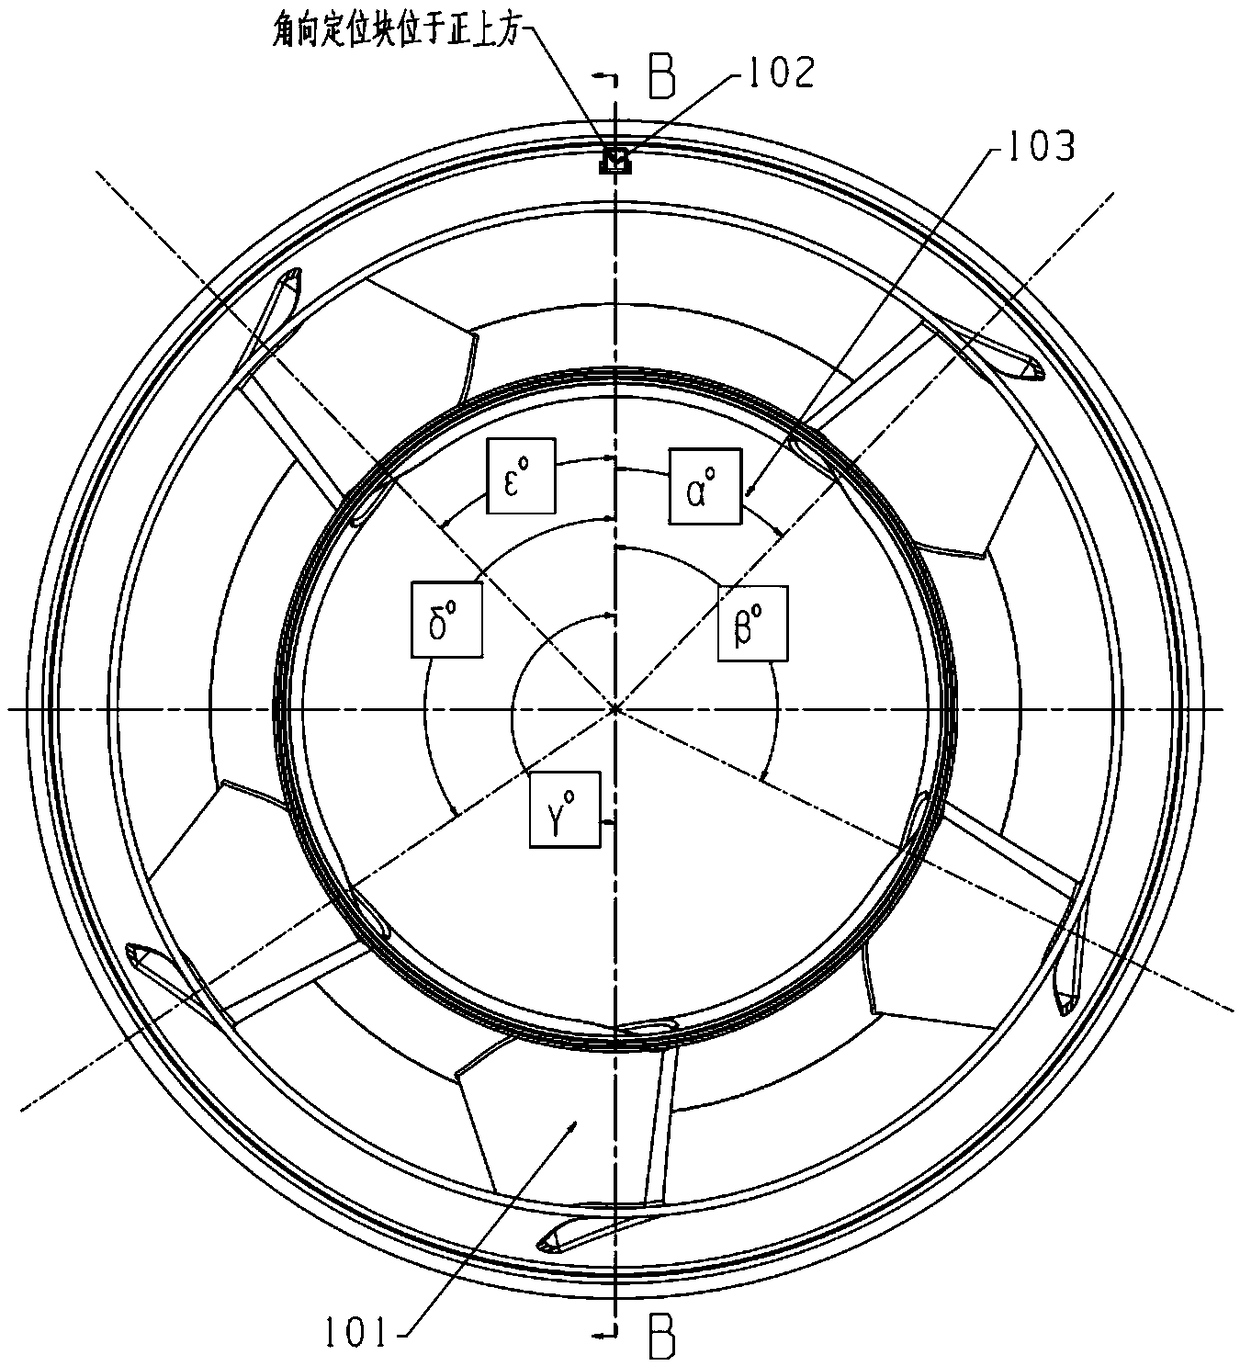 An engine fuel supply support plate casing structure and an engine comprising the structure